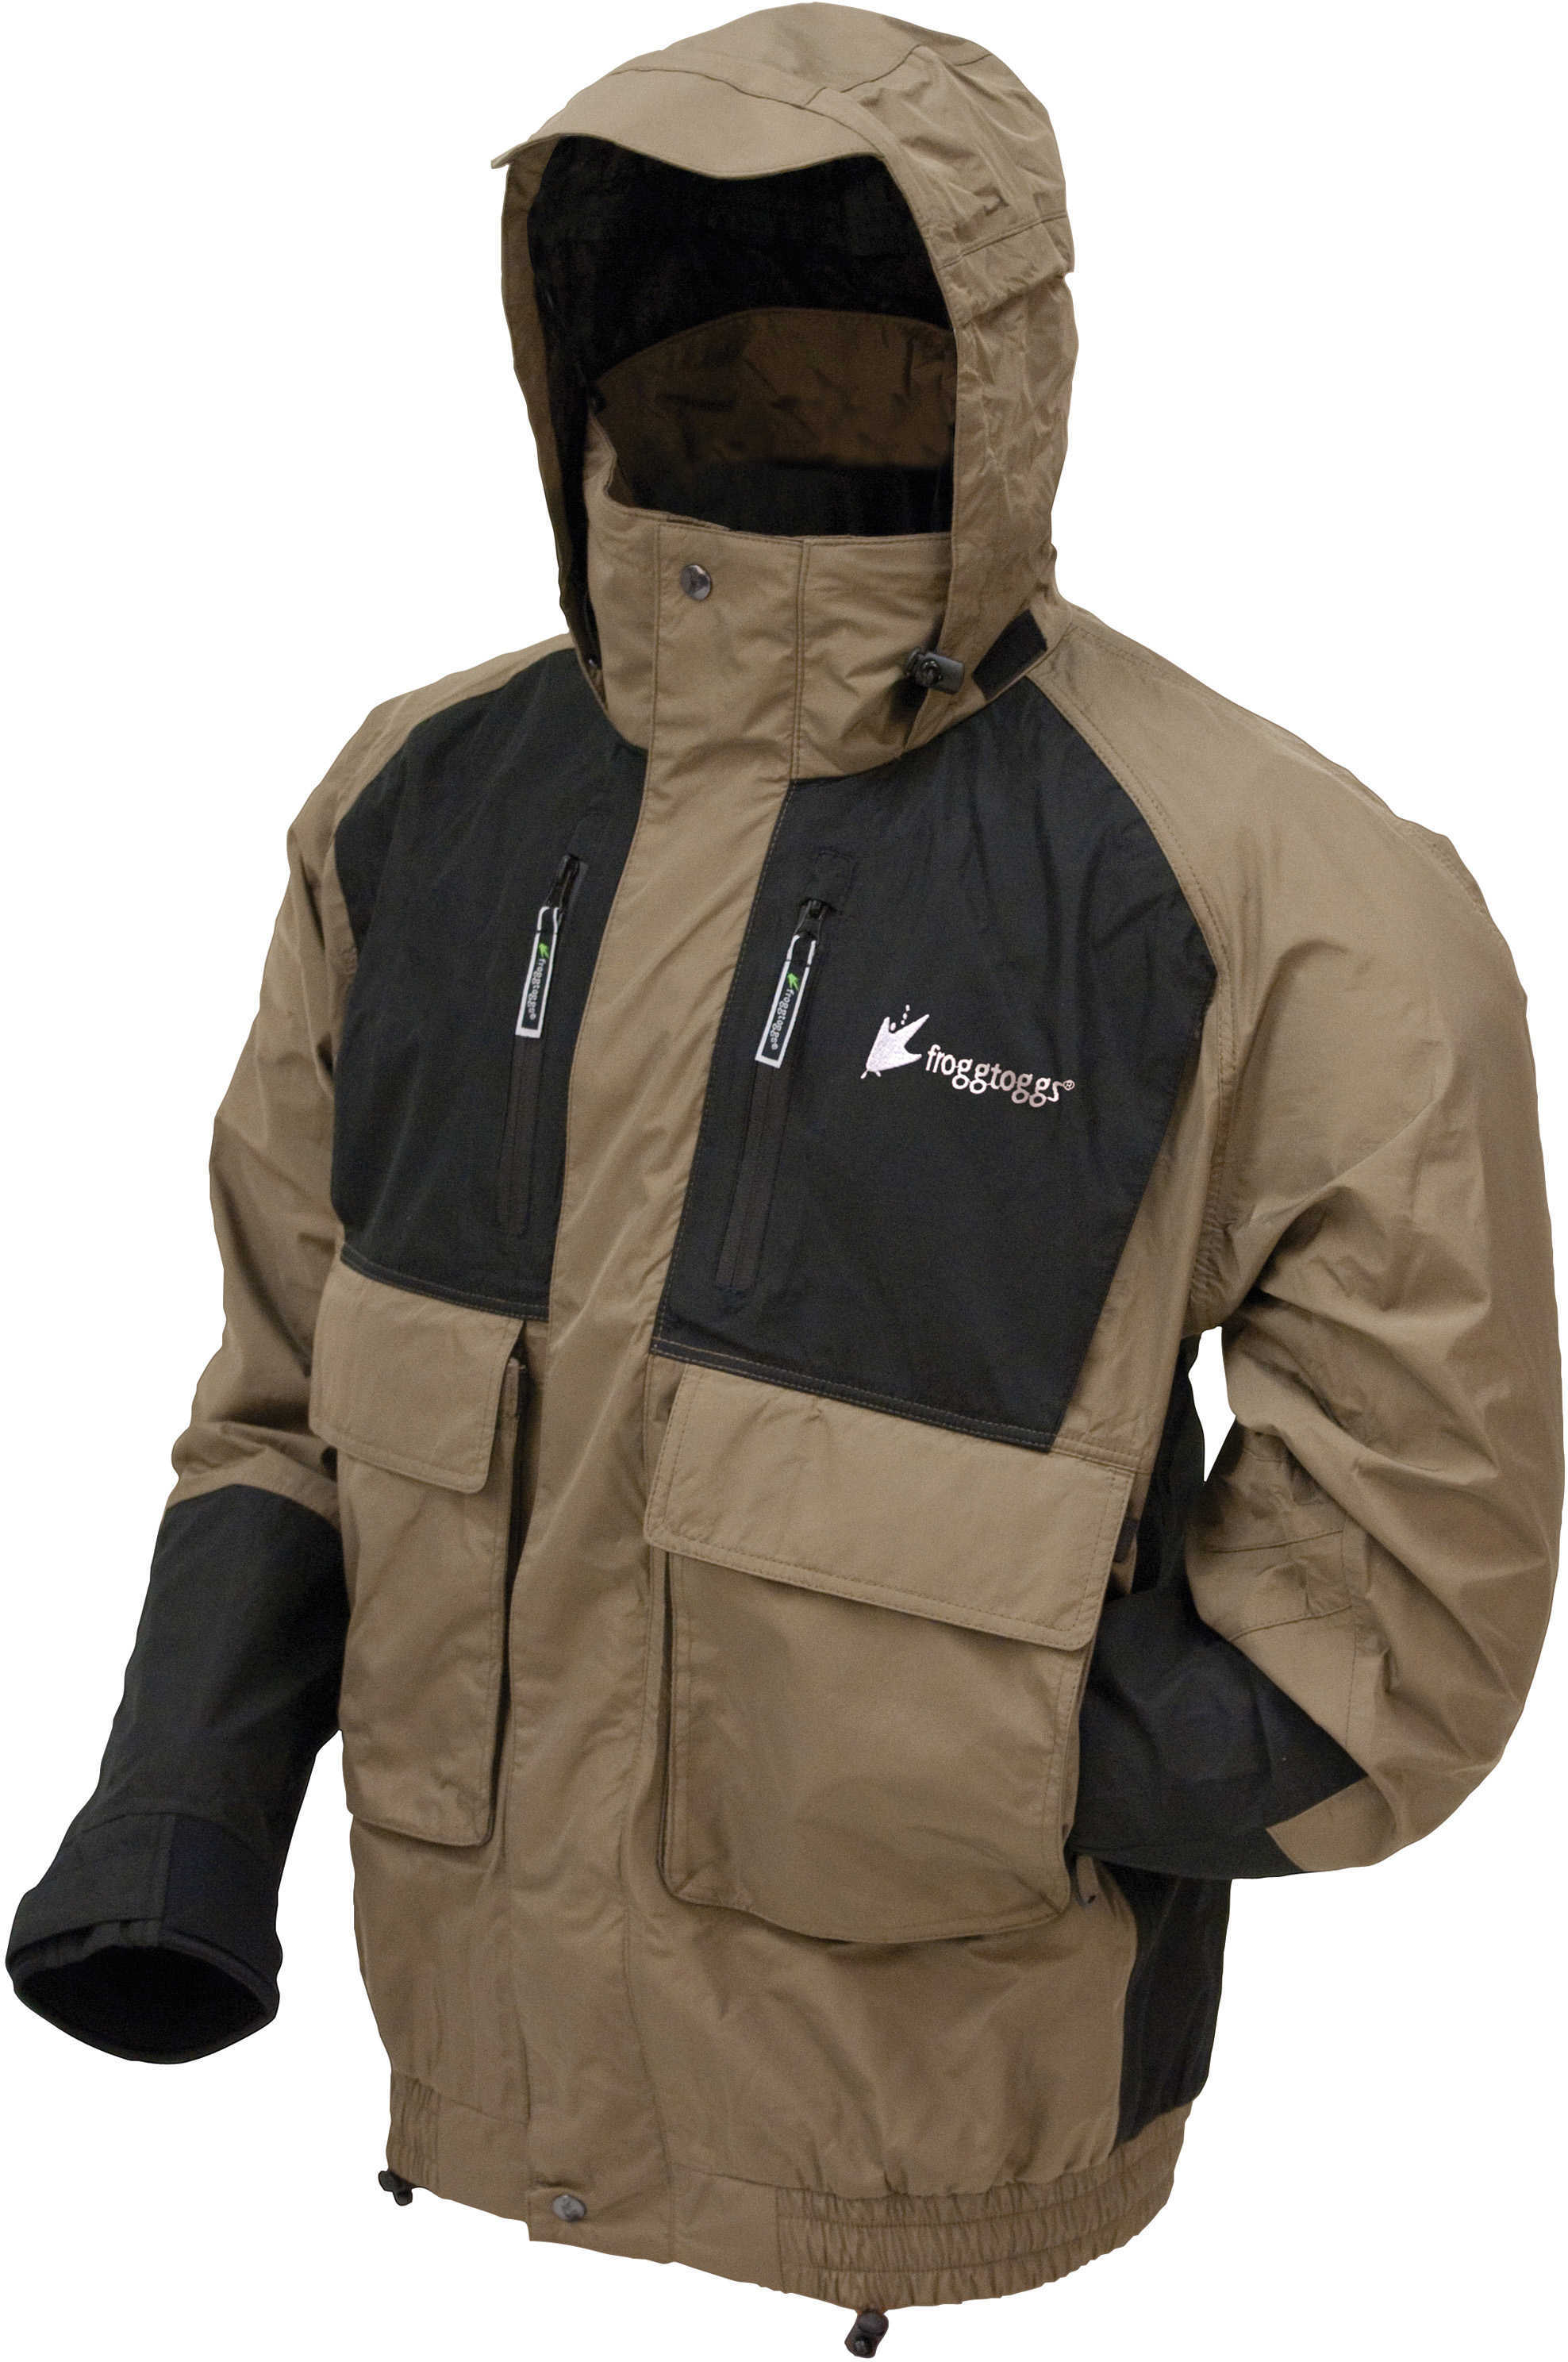 Frogg Toggs Firebelly Toadz Jacket Black/Stone Small NT6201-105SM